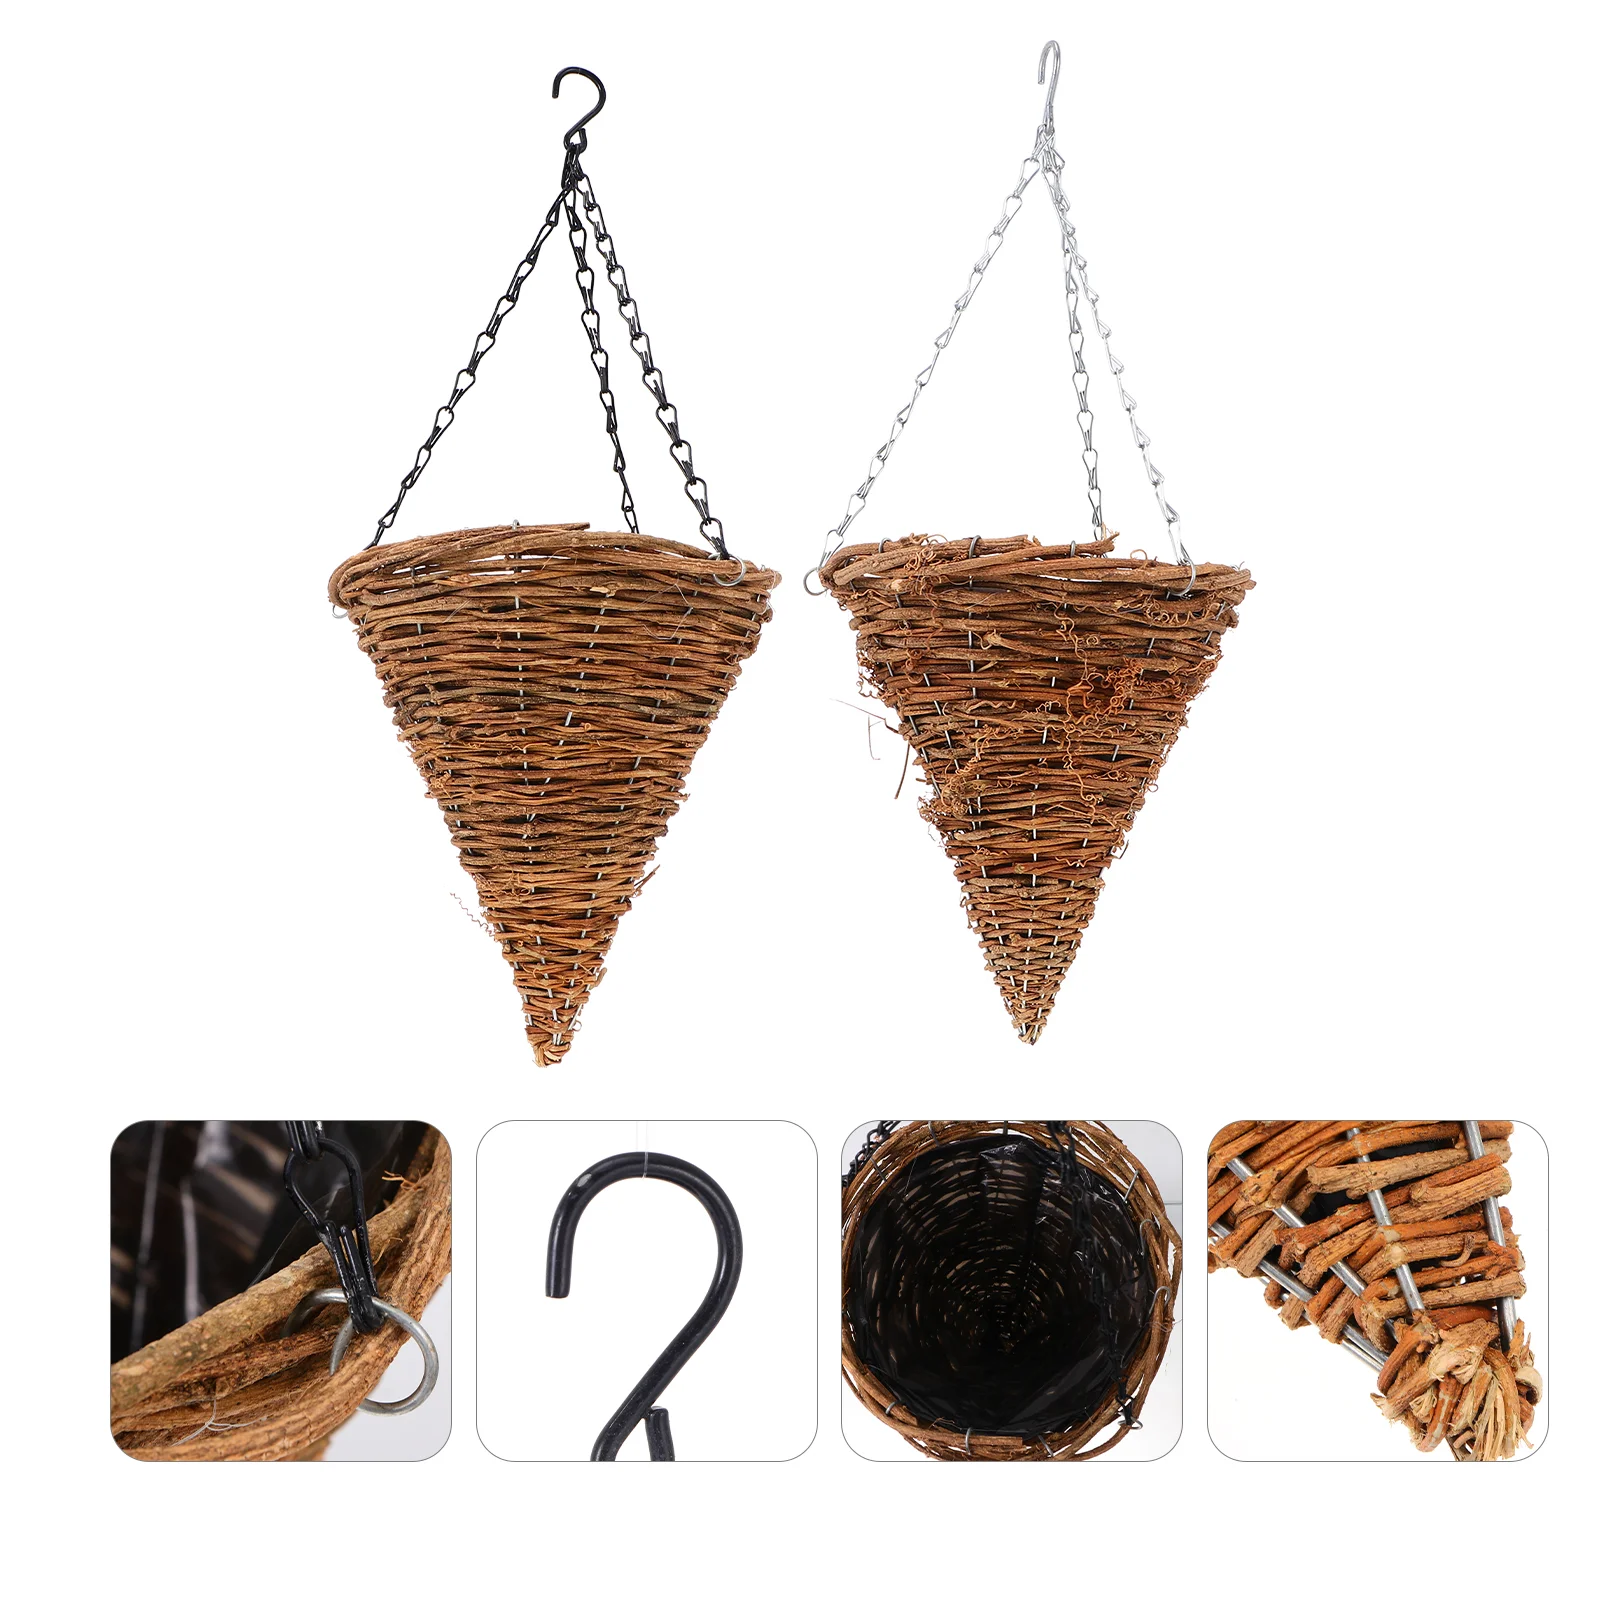 

Hanging Basket Flower Planter Rattancone Pot Wicker Wall Planters Farmhouse Outdoorwoven Orchid Holder Weaving Shaped Window